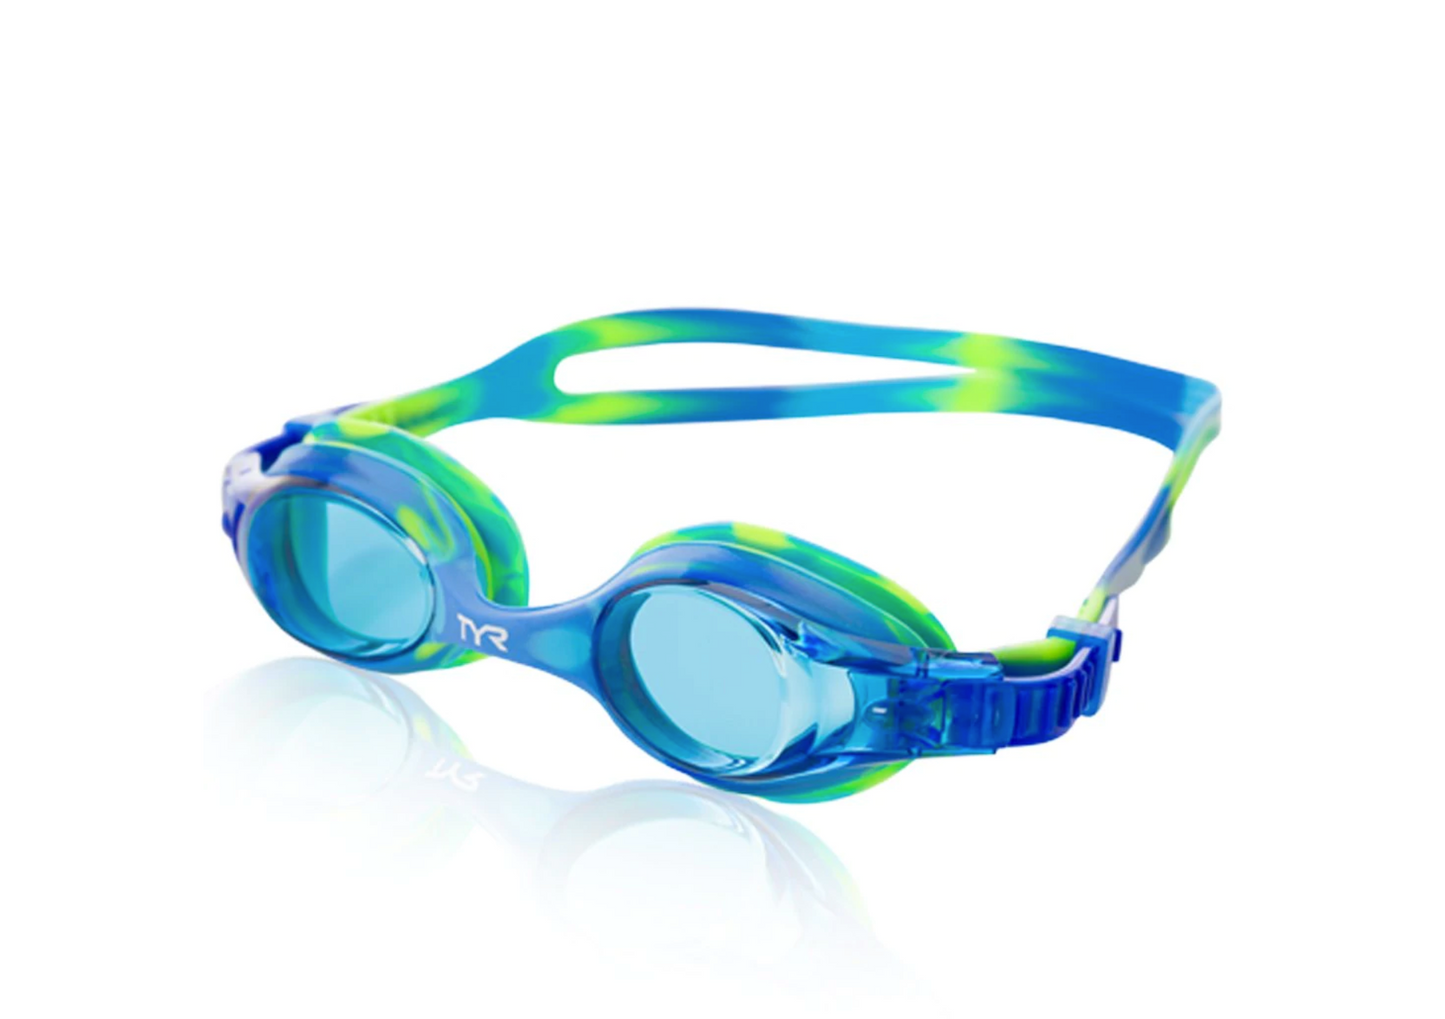 Youth Tie- Dye Goggles